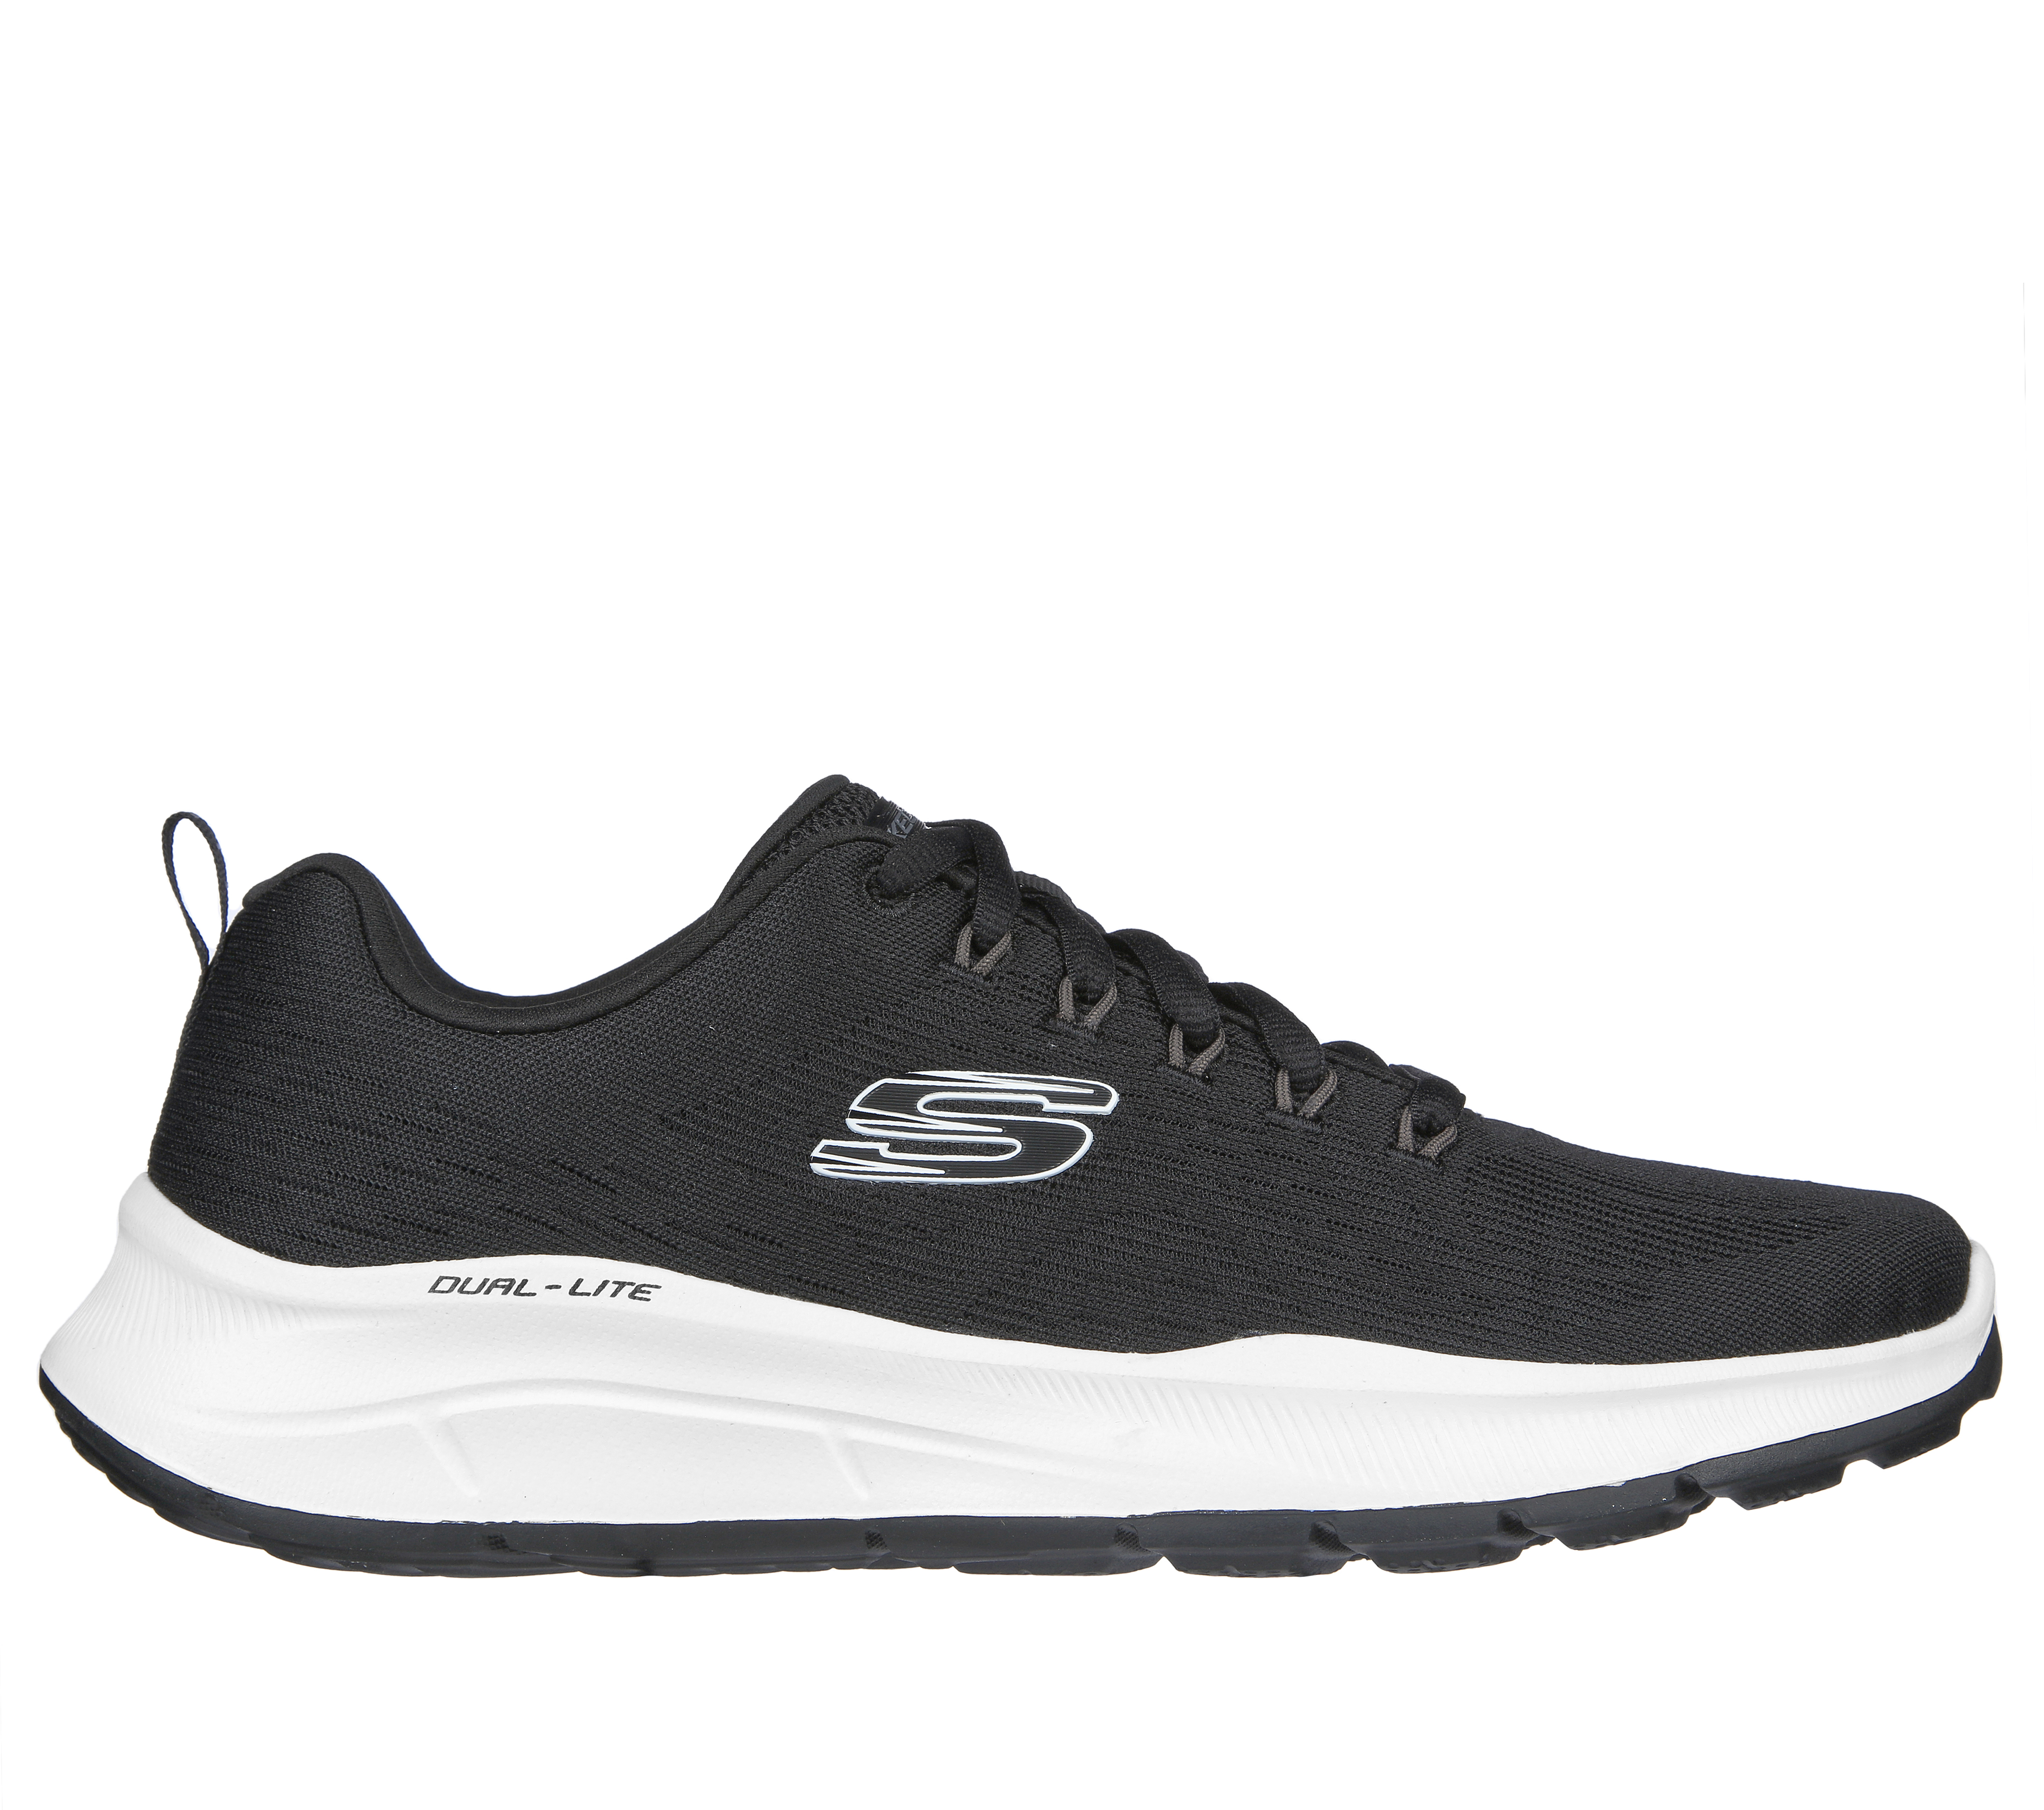 Beknopt pantoffel dief Relaxed Fit: Equalizer 5.0 | SKECHERS BE